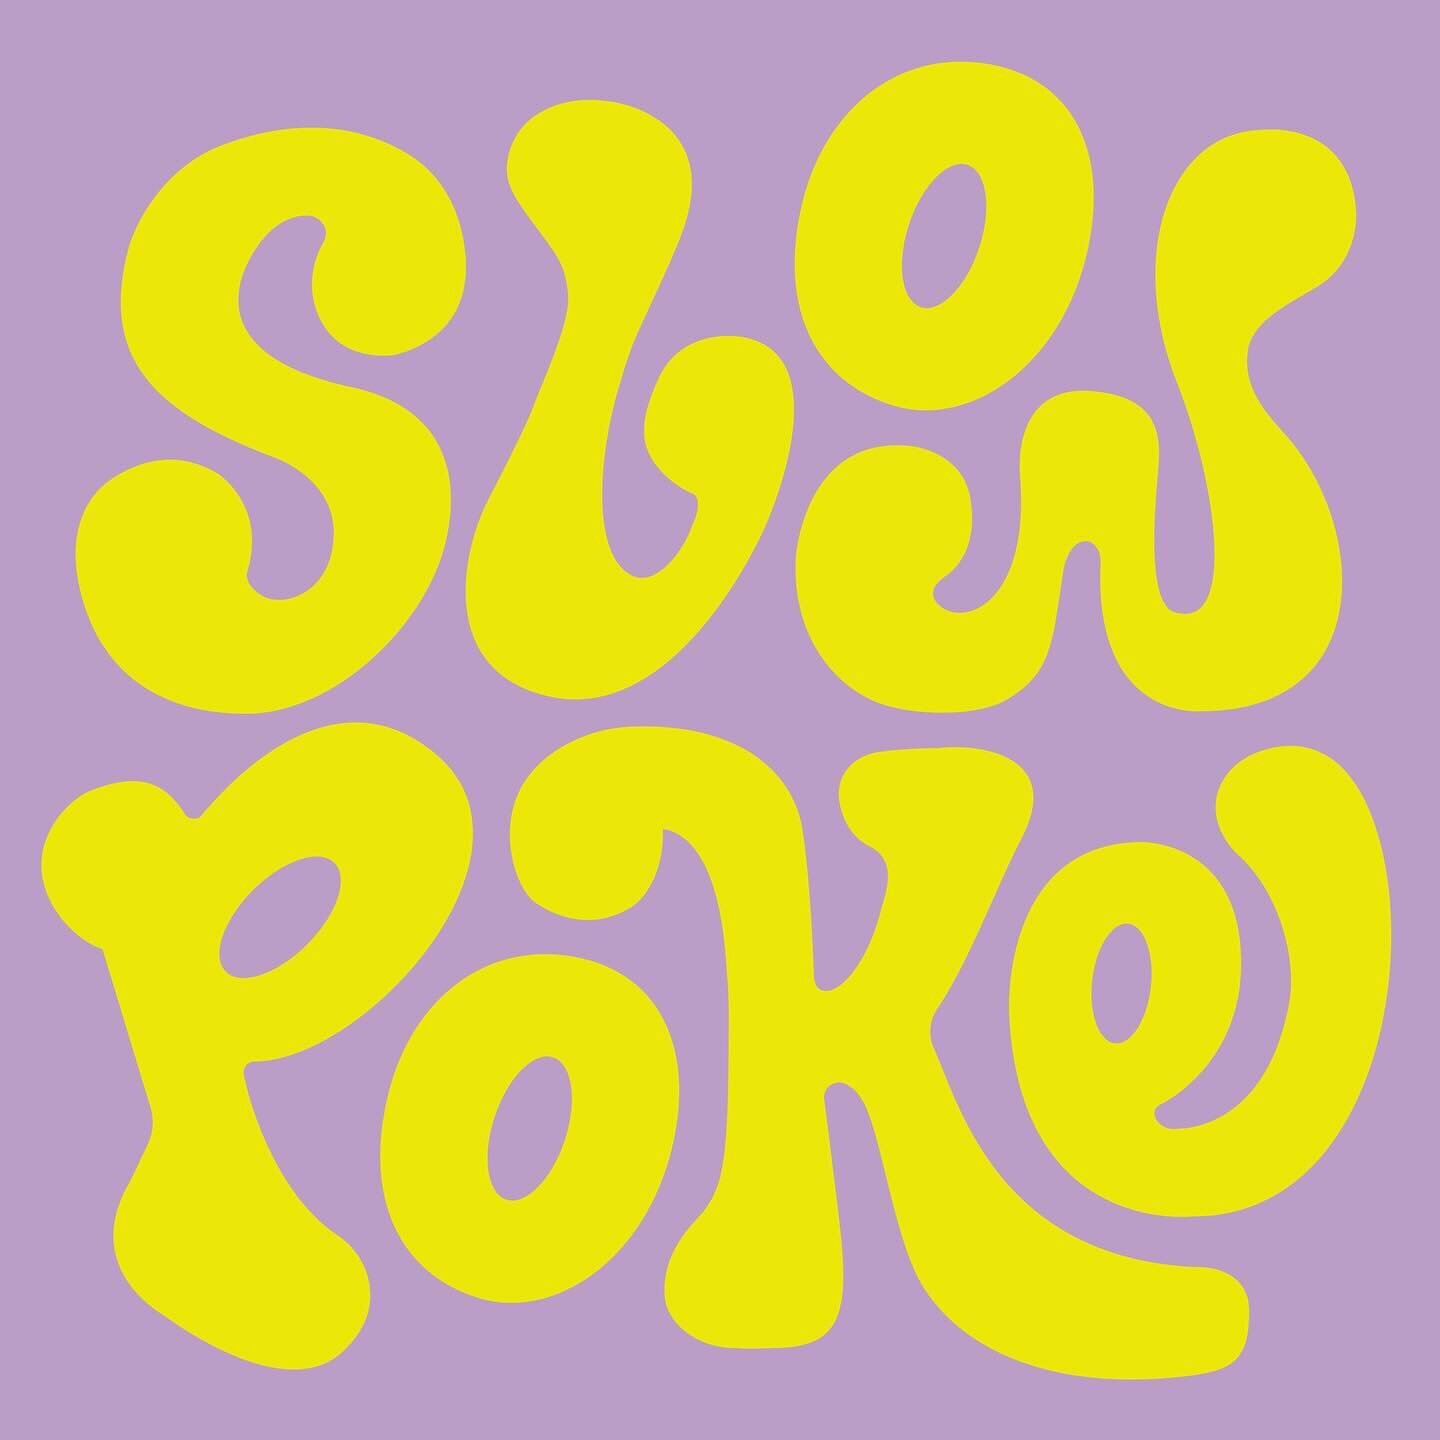 84/100 - Slow Poke

The term &ldquo;slowpoke&rdquo; is an informal expression used to describe someone or something that is slow or sluggish. The origin of the phrase can be traced back to the early 20th century. The word &ldquo;poke&rdquo; in this c